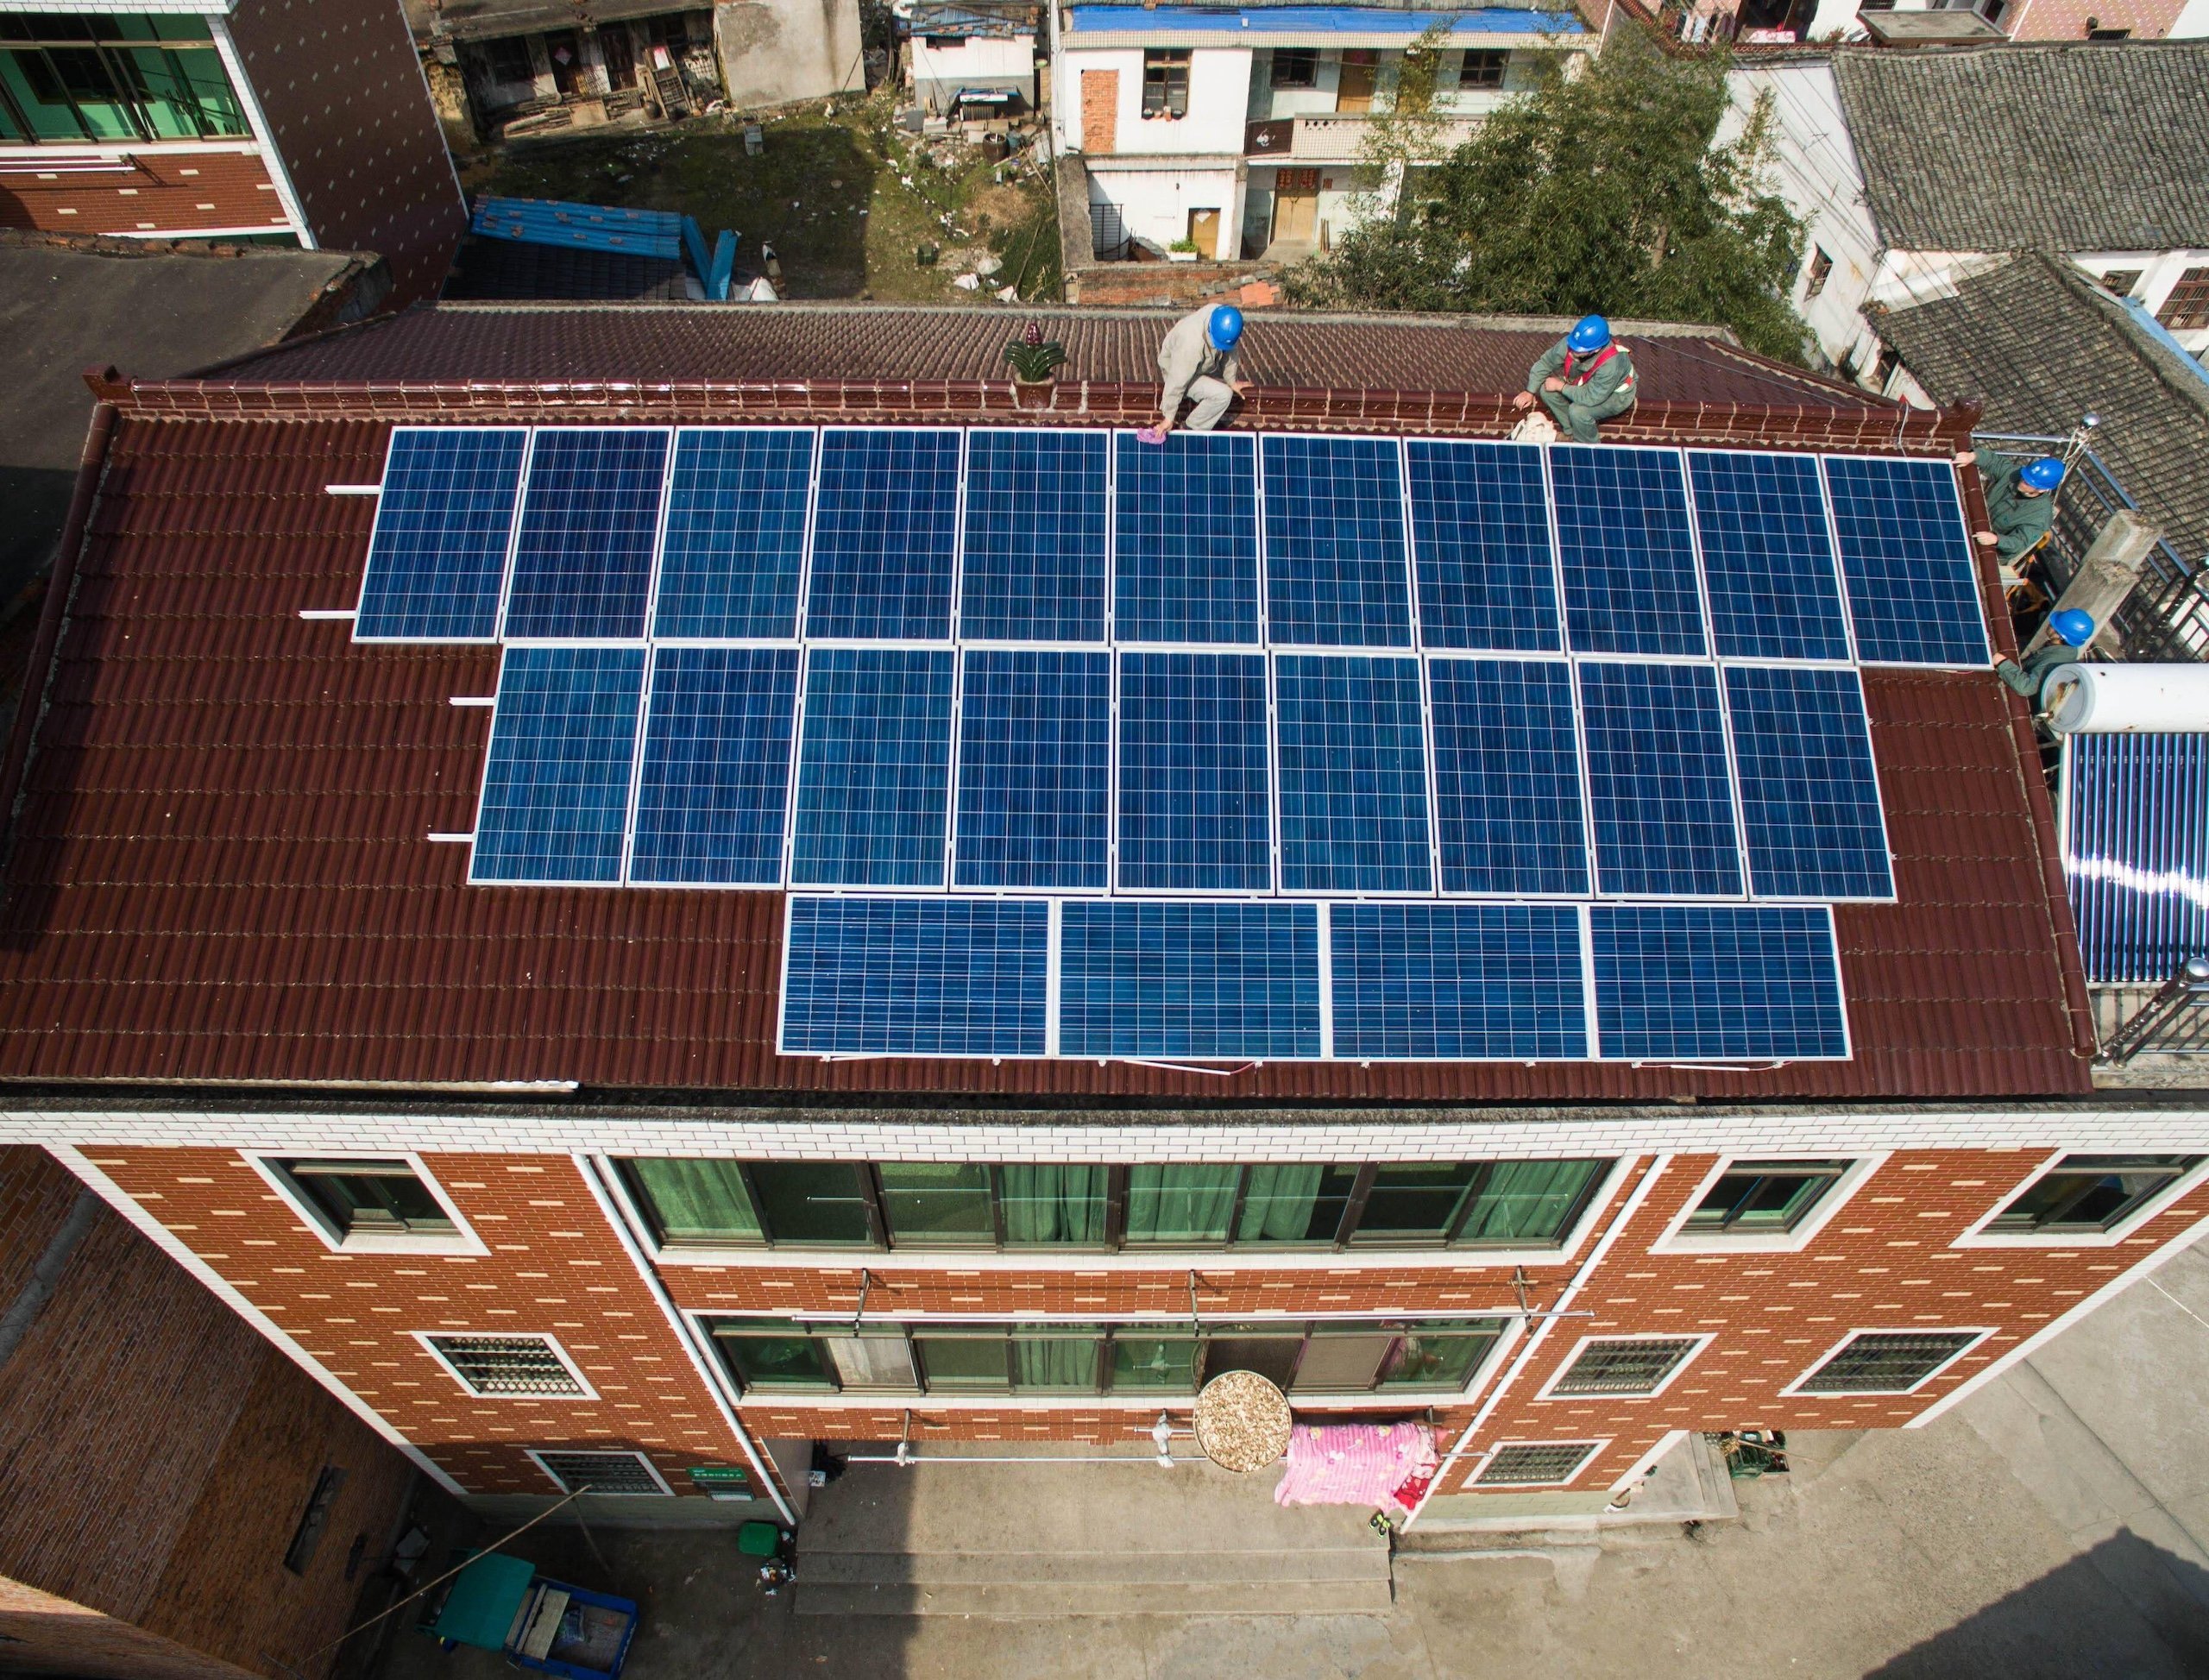 <p>Technicians test solar panels on a residential building in Yiwu, east China&#8217;s Zhejiang province. In Hubei province&#8217;s Wuhan, residents of Beihu have assigned their rooftop solar rights to a power firm. In return, they get a large discount on their service charge and improvements to their communal rooftop space (Image: Alamy)</p>